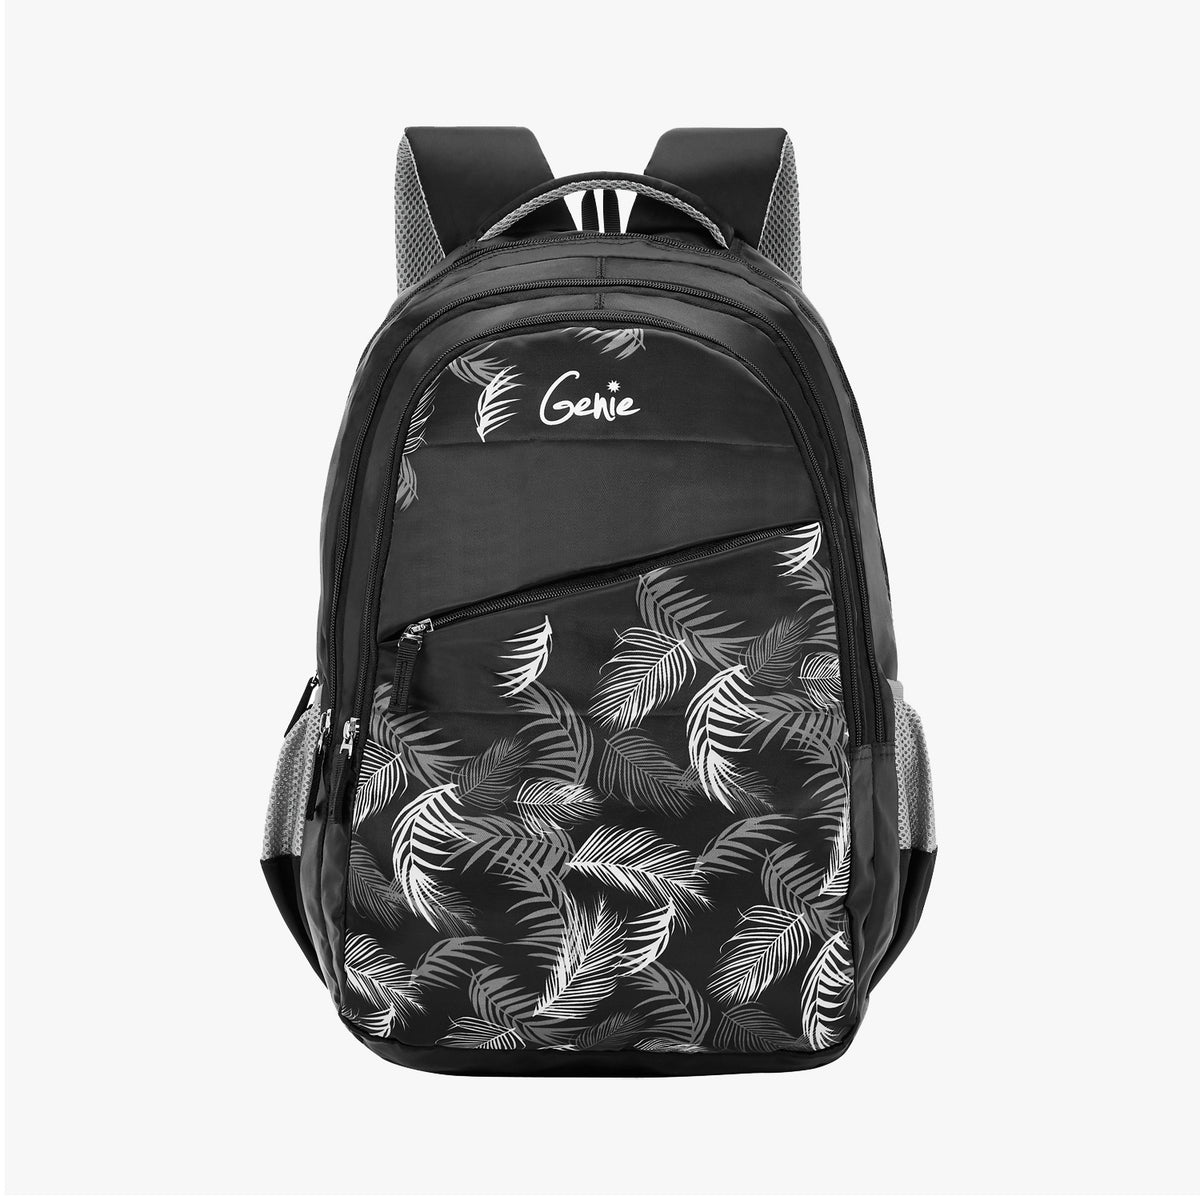 Fashion School Bag Backpack For Girl With Headset And Charging Interface  MFB22 | Cheap Cell-phone Case With Keyboard For Sale | Girl backpacks,  School bags, Backpack bags